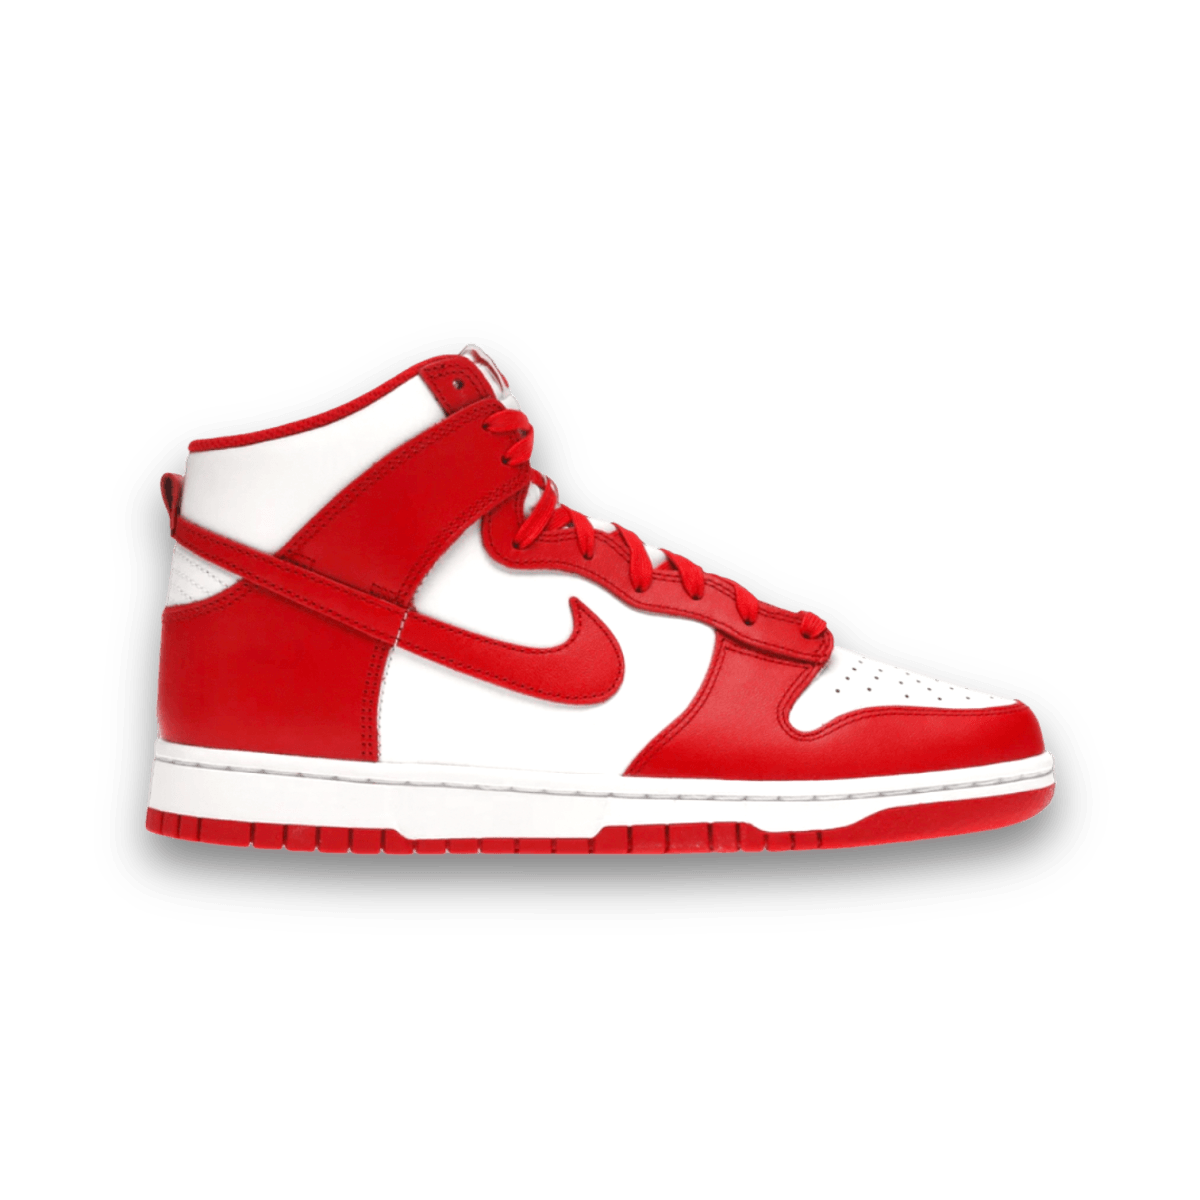 Dunk High Championship White Red - High Sneaker - Jawns on Fire Sneakers & Streetwear